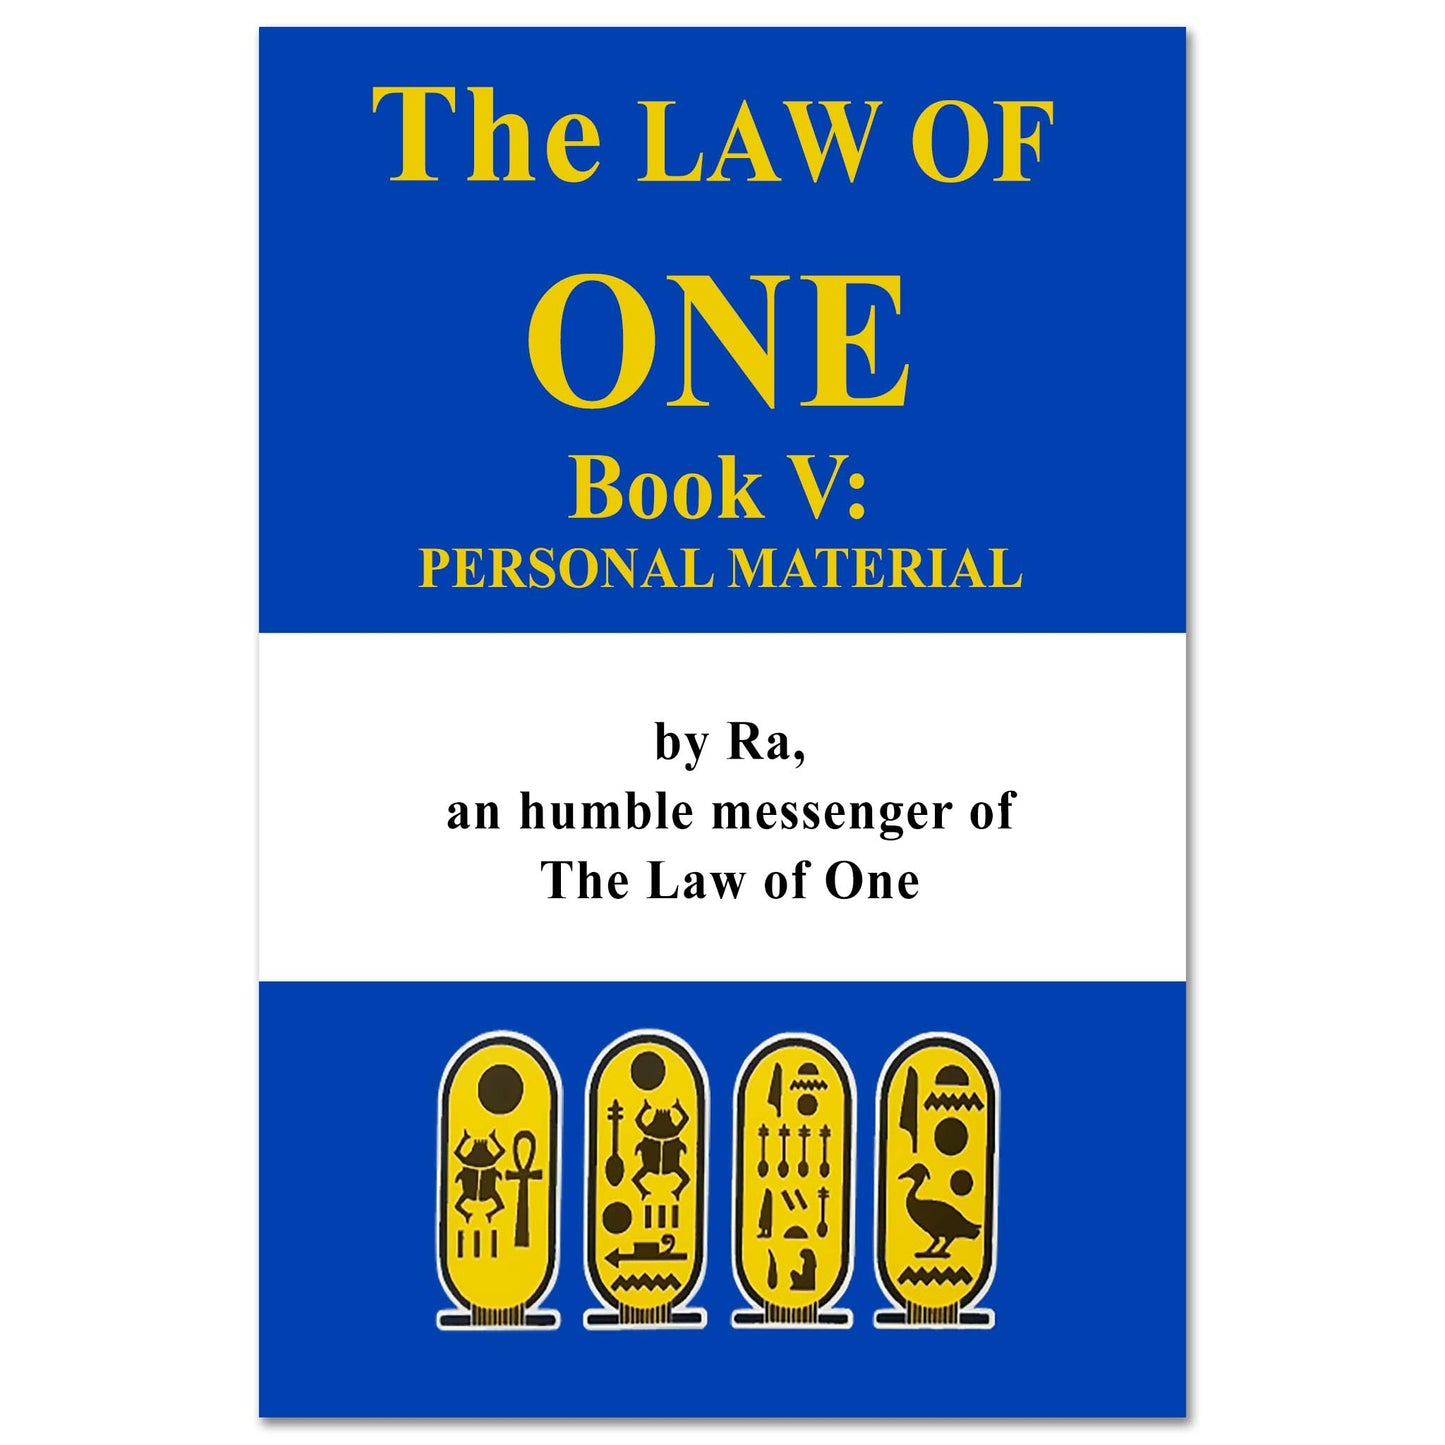 The Law of One: Book V